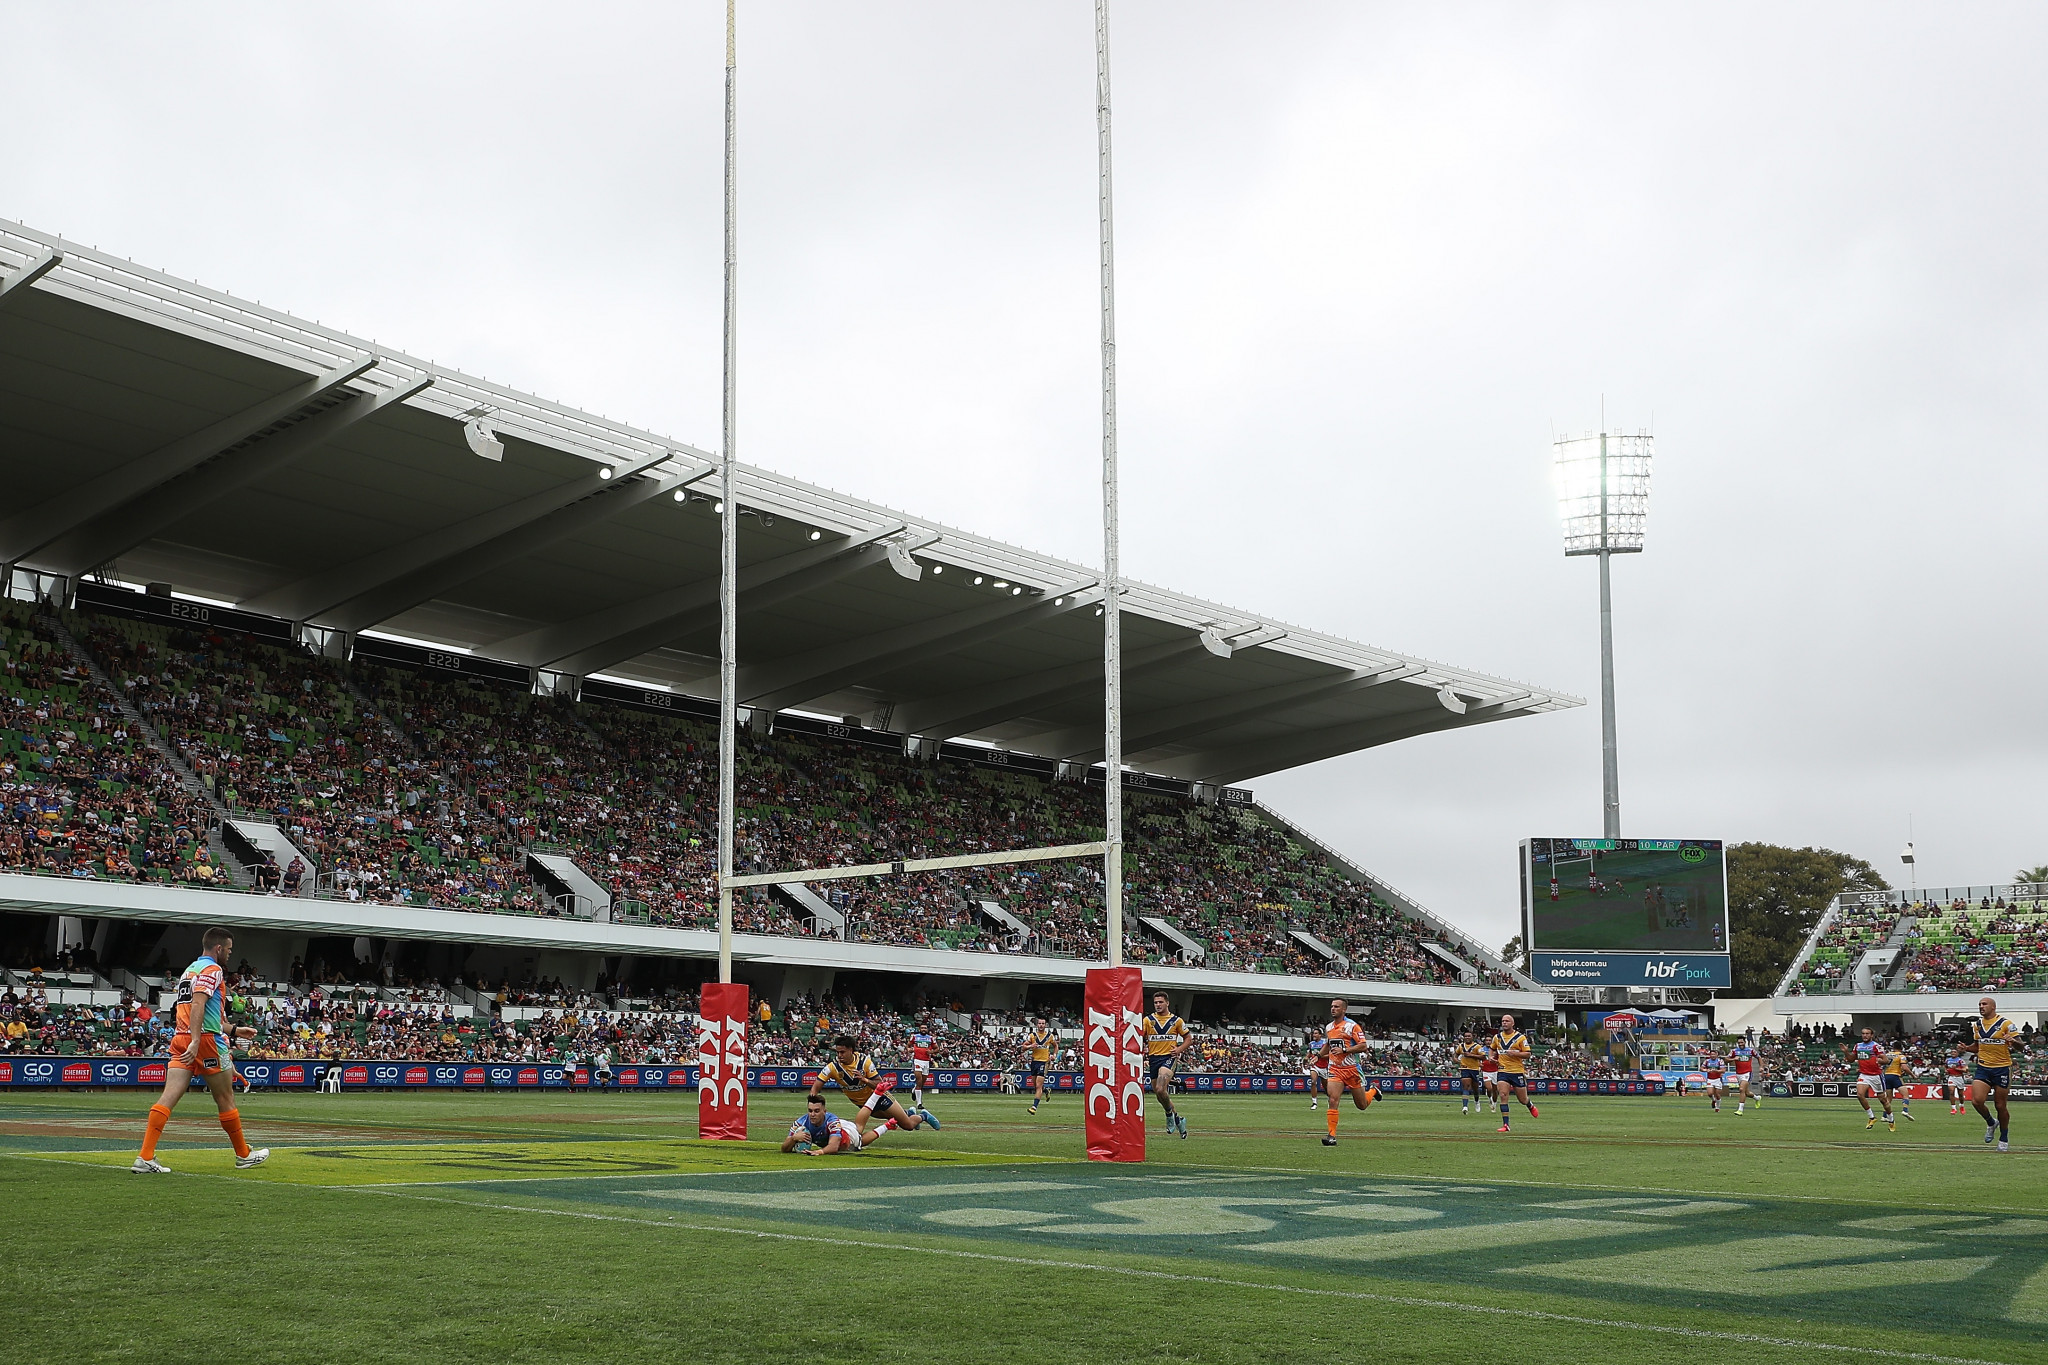 International Rugby League is aiming for the nines format of the sport to feature at the Brisbane 2032 Olympics ©KRLF